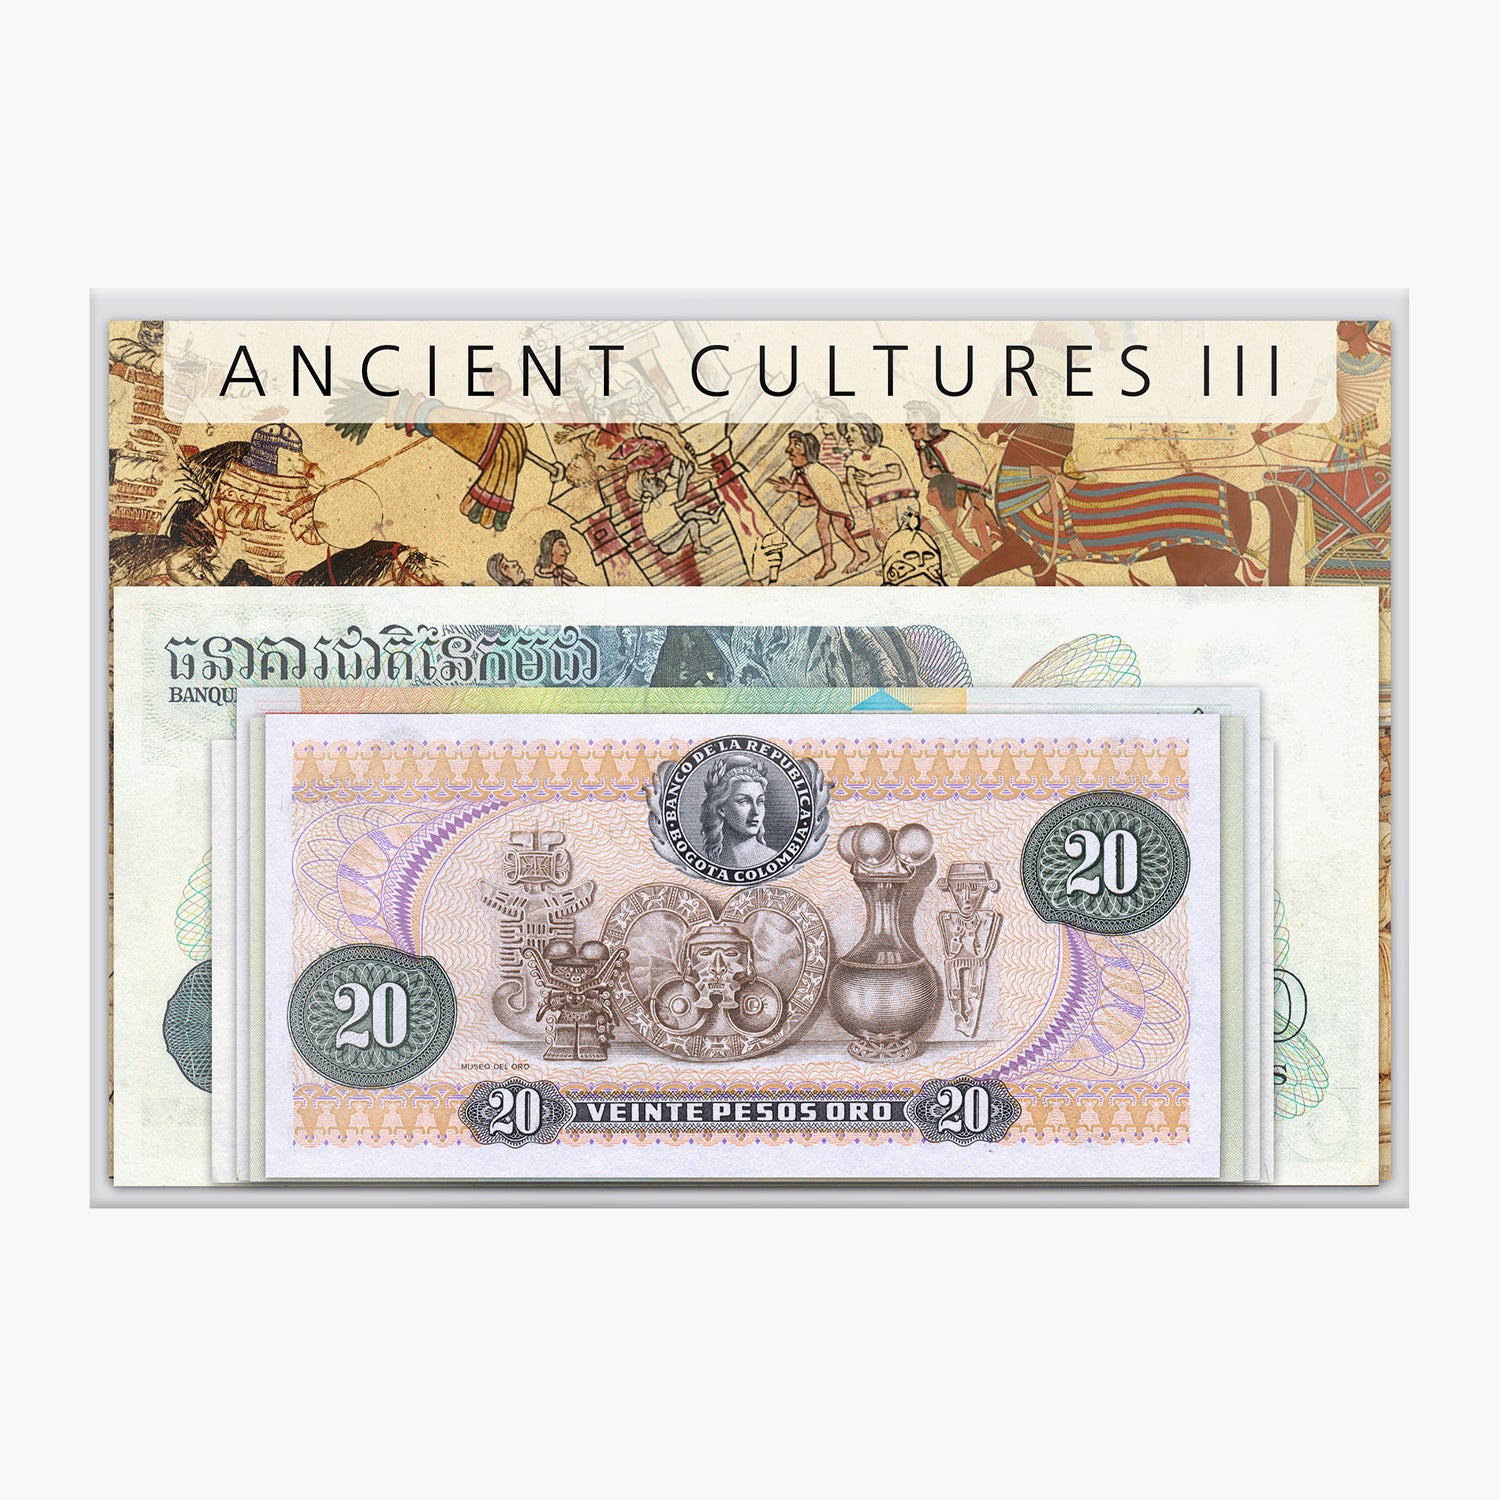 Billet Collection Cultures Anciennes III